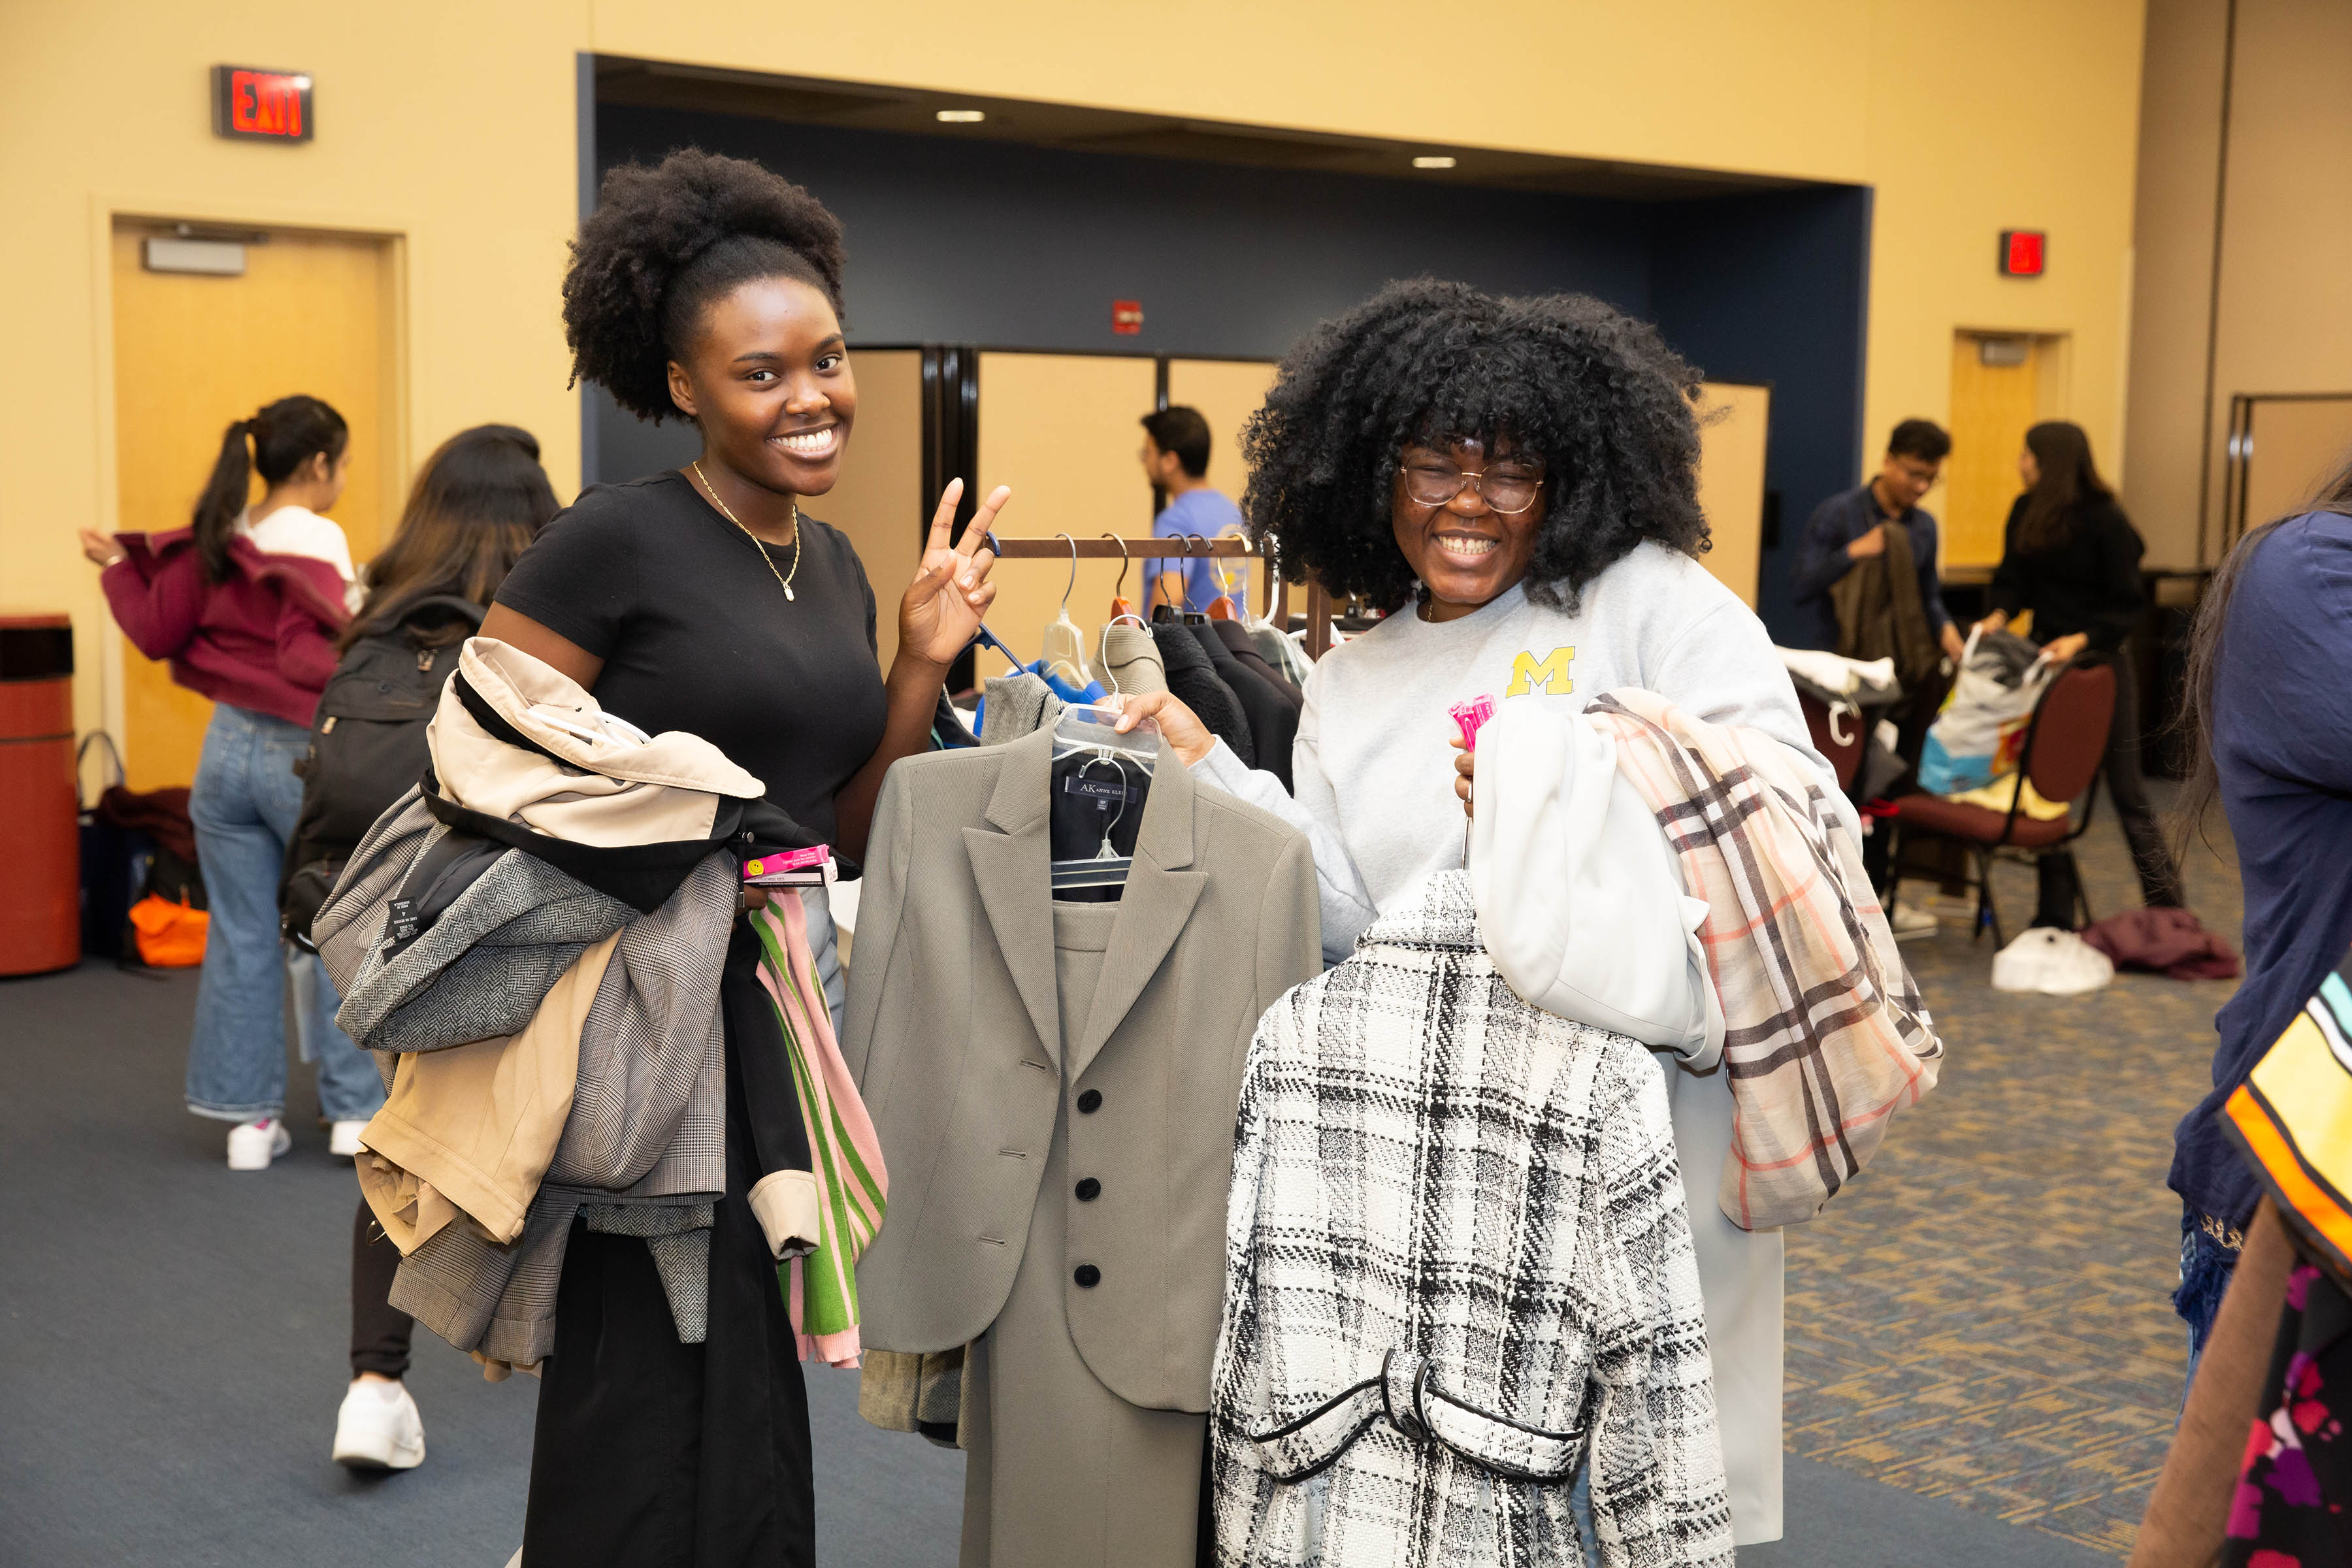 Two students pose for a photo with new clothing they've picked out at the clothing pantry pop-up event.